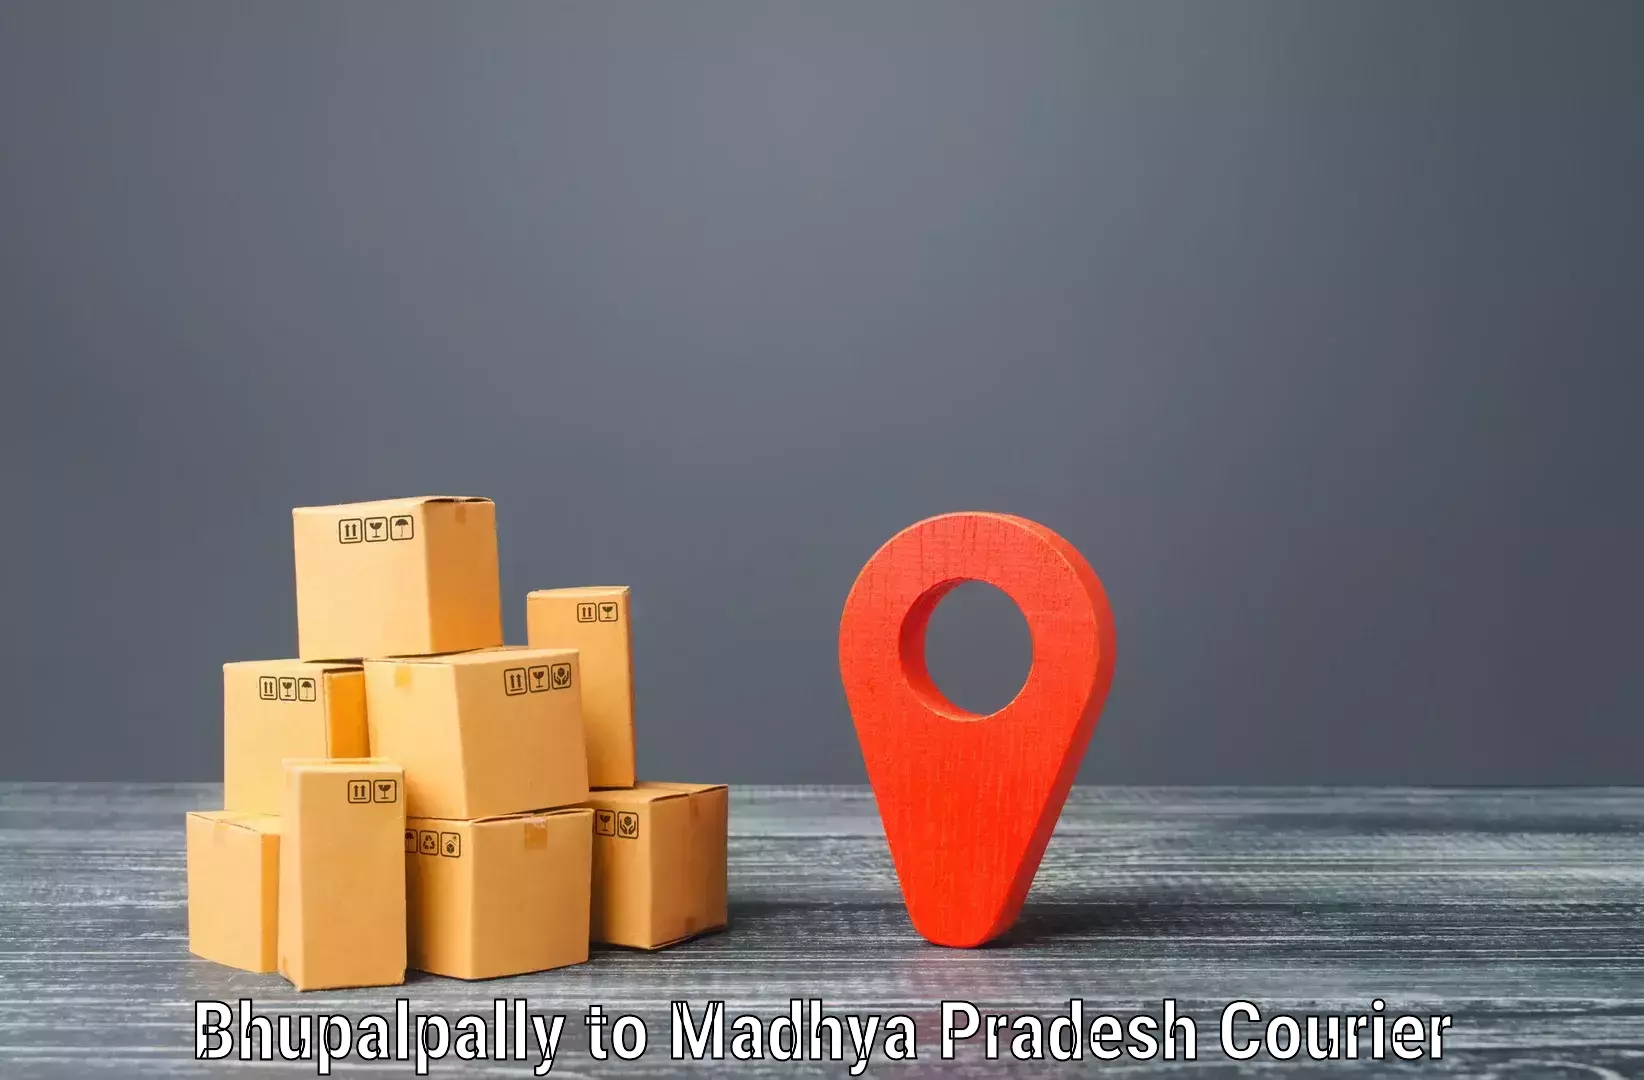 Overnight delivery services Bhupalpally to Sagar